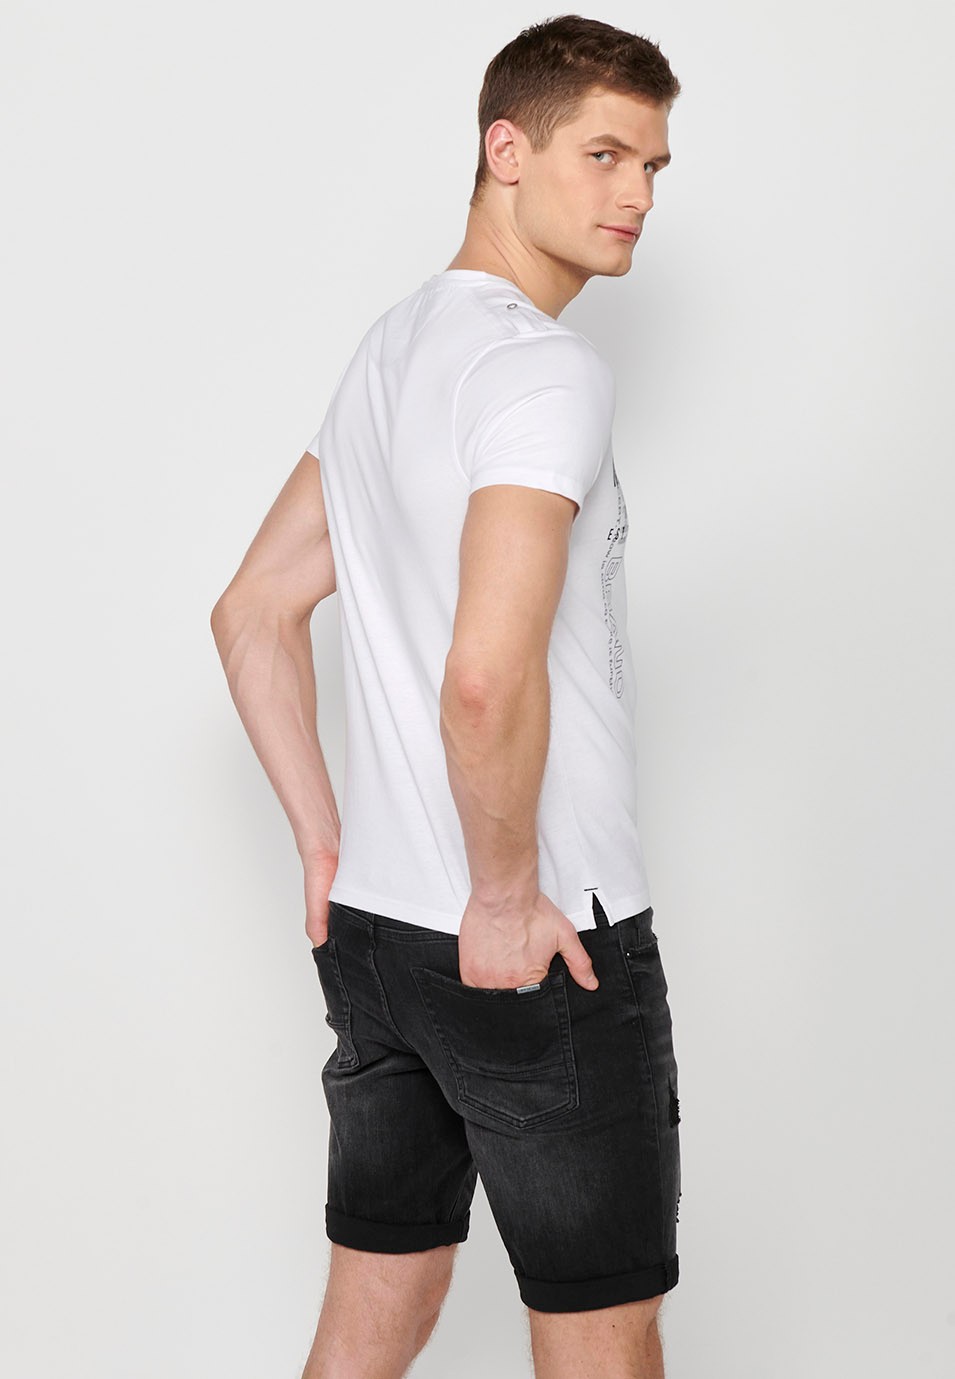 Men's white cotton short-sleeved T-shirt, round neck with buttoned opening